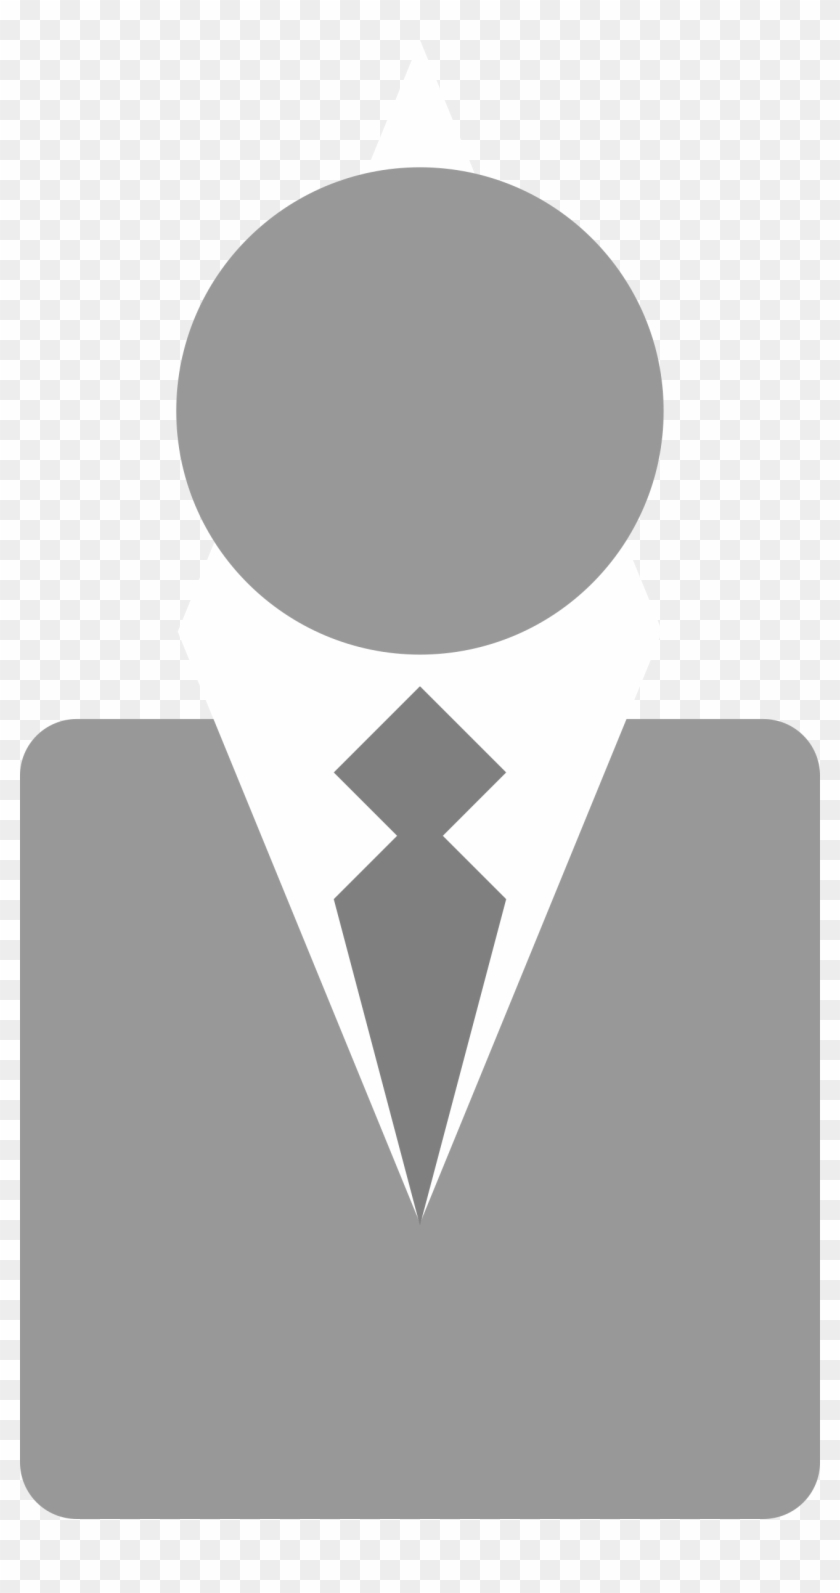 This Free Icons Png Design Of Business Man - Business Clip Art #211329